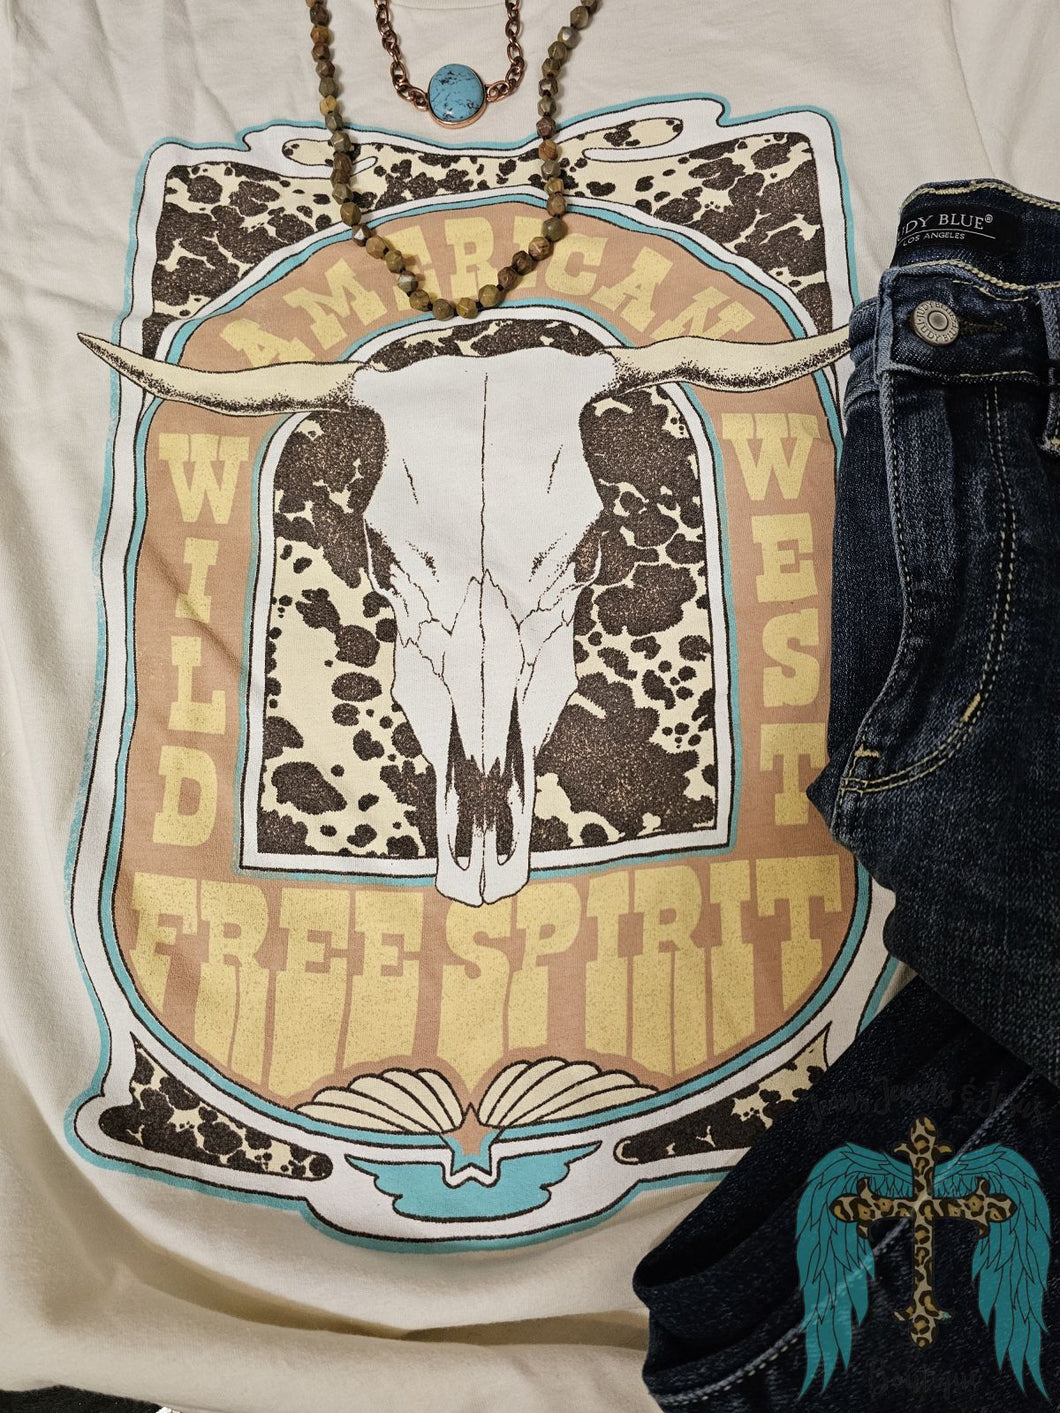 American Wild West Graphic Tee